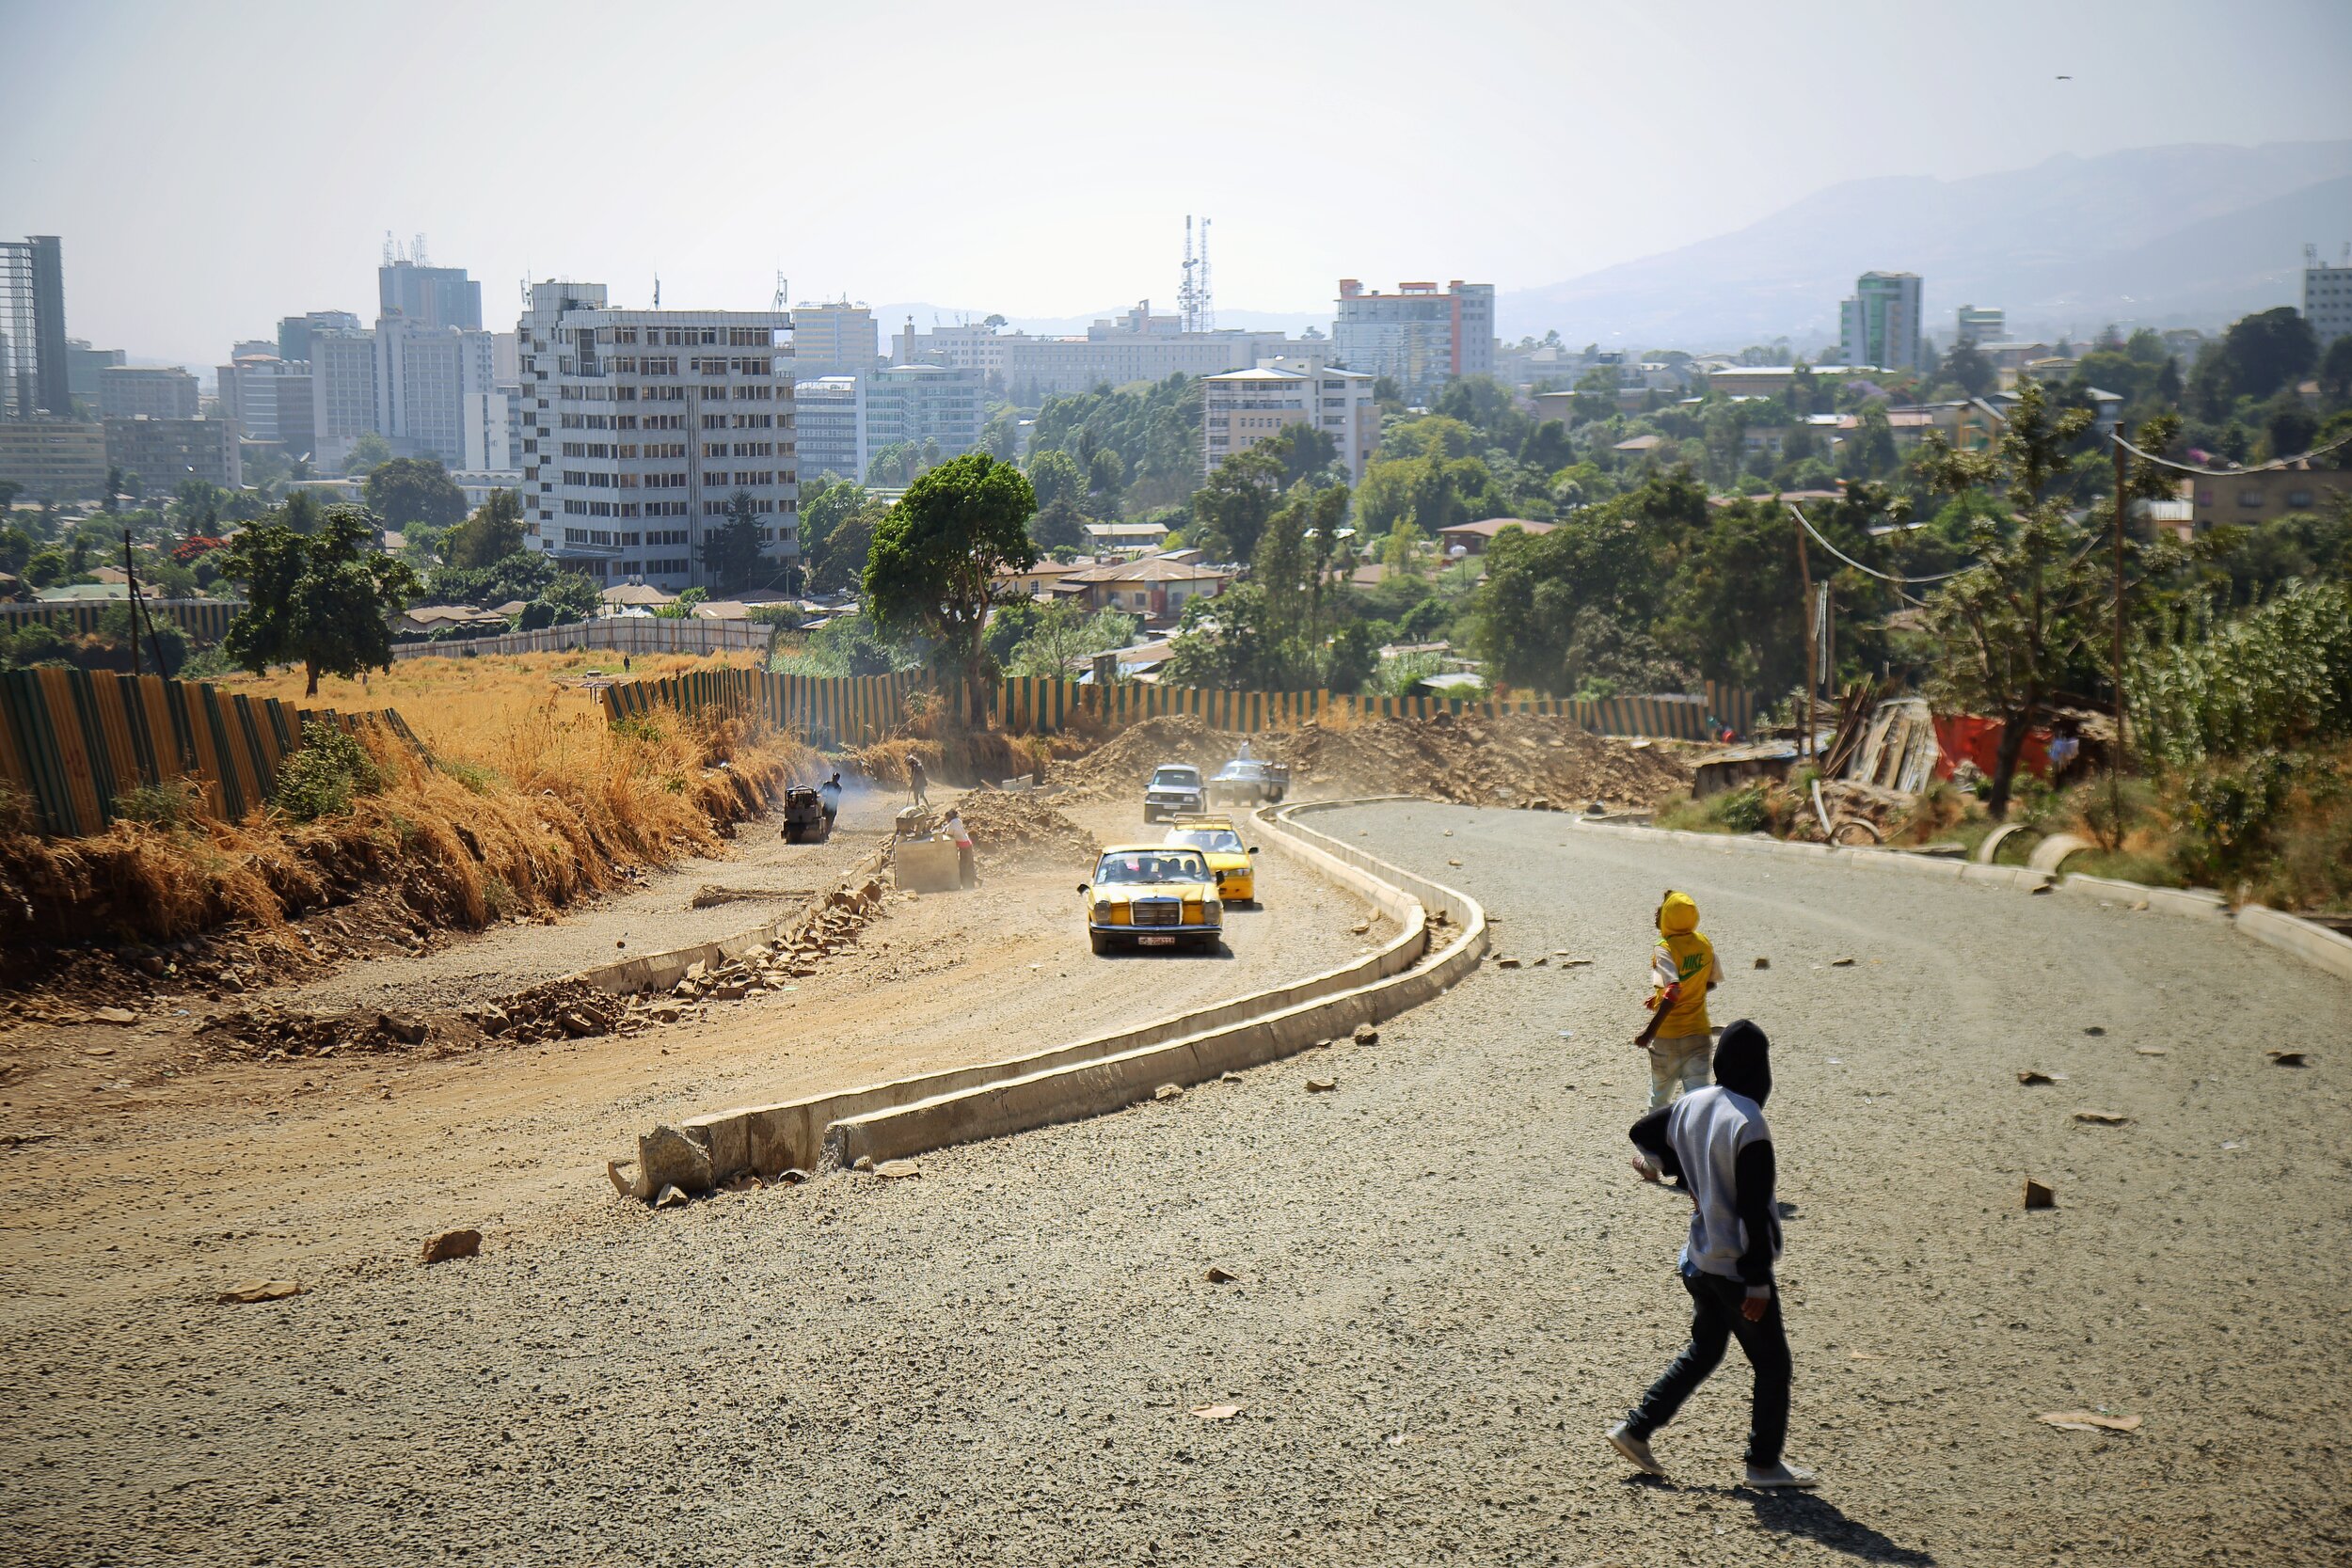 Urban renewal in Addis usually means total clearance of the existing buildings. 